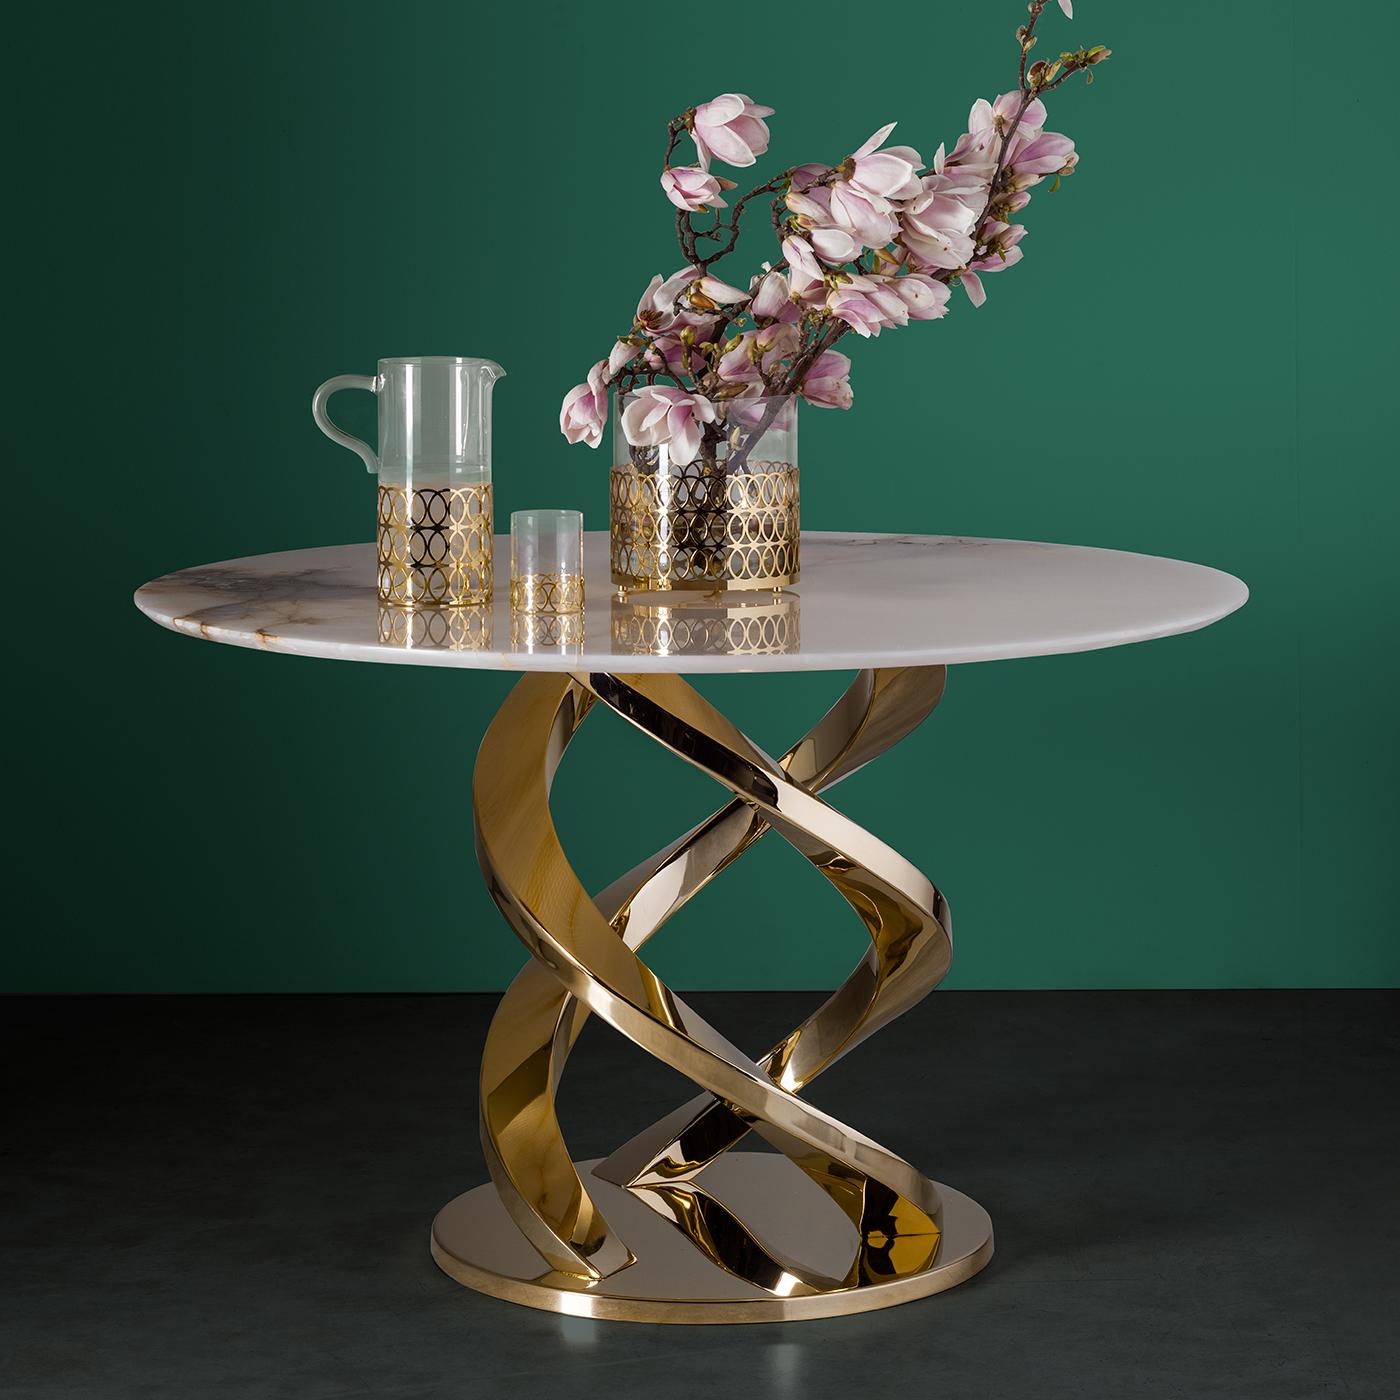 This magnificent dining table is part of the Home Couture collection, inspired by the glamour and bold character of Art Deco furniture. The 24-karat gold-plated stainless steel base rises up in three spiraling elements of great visual impact. The